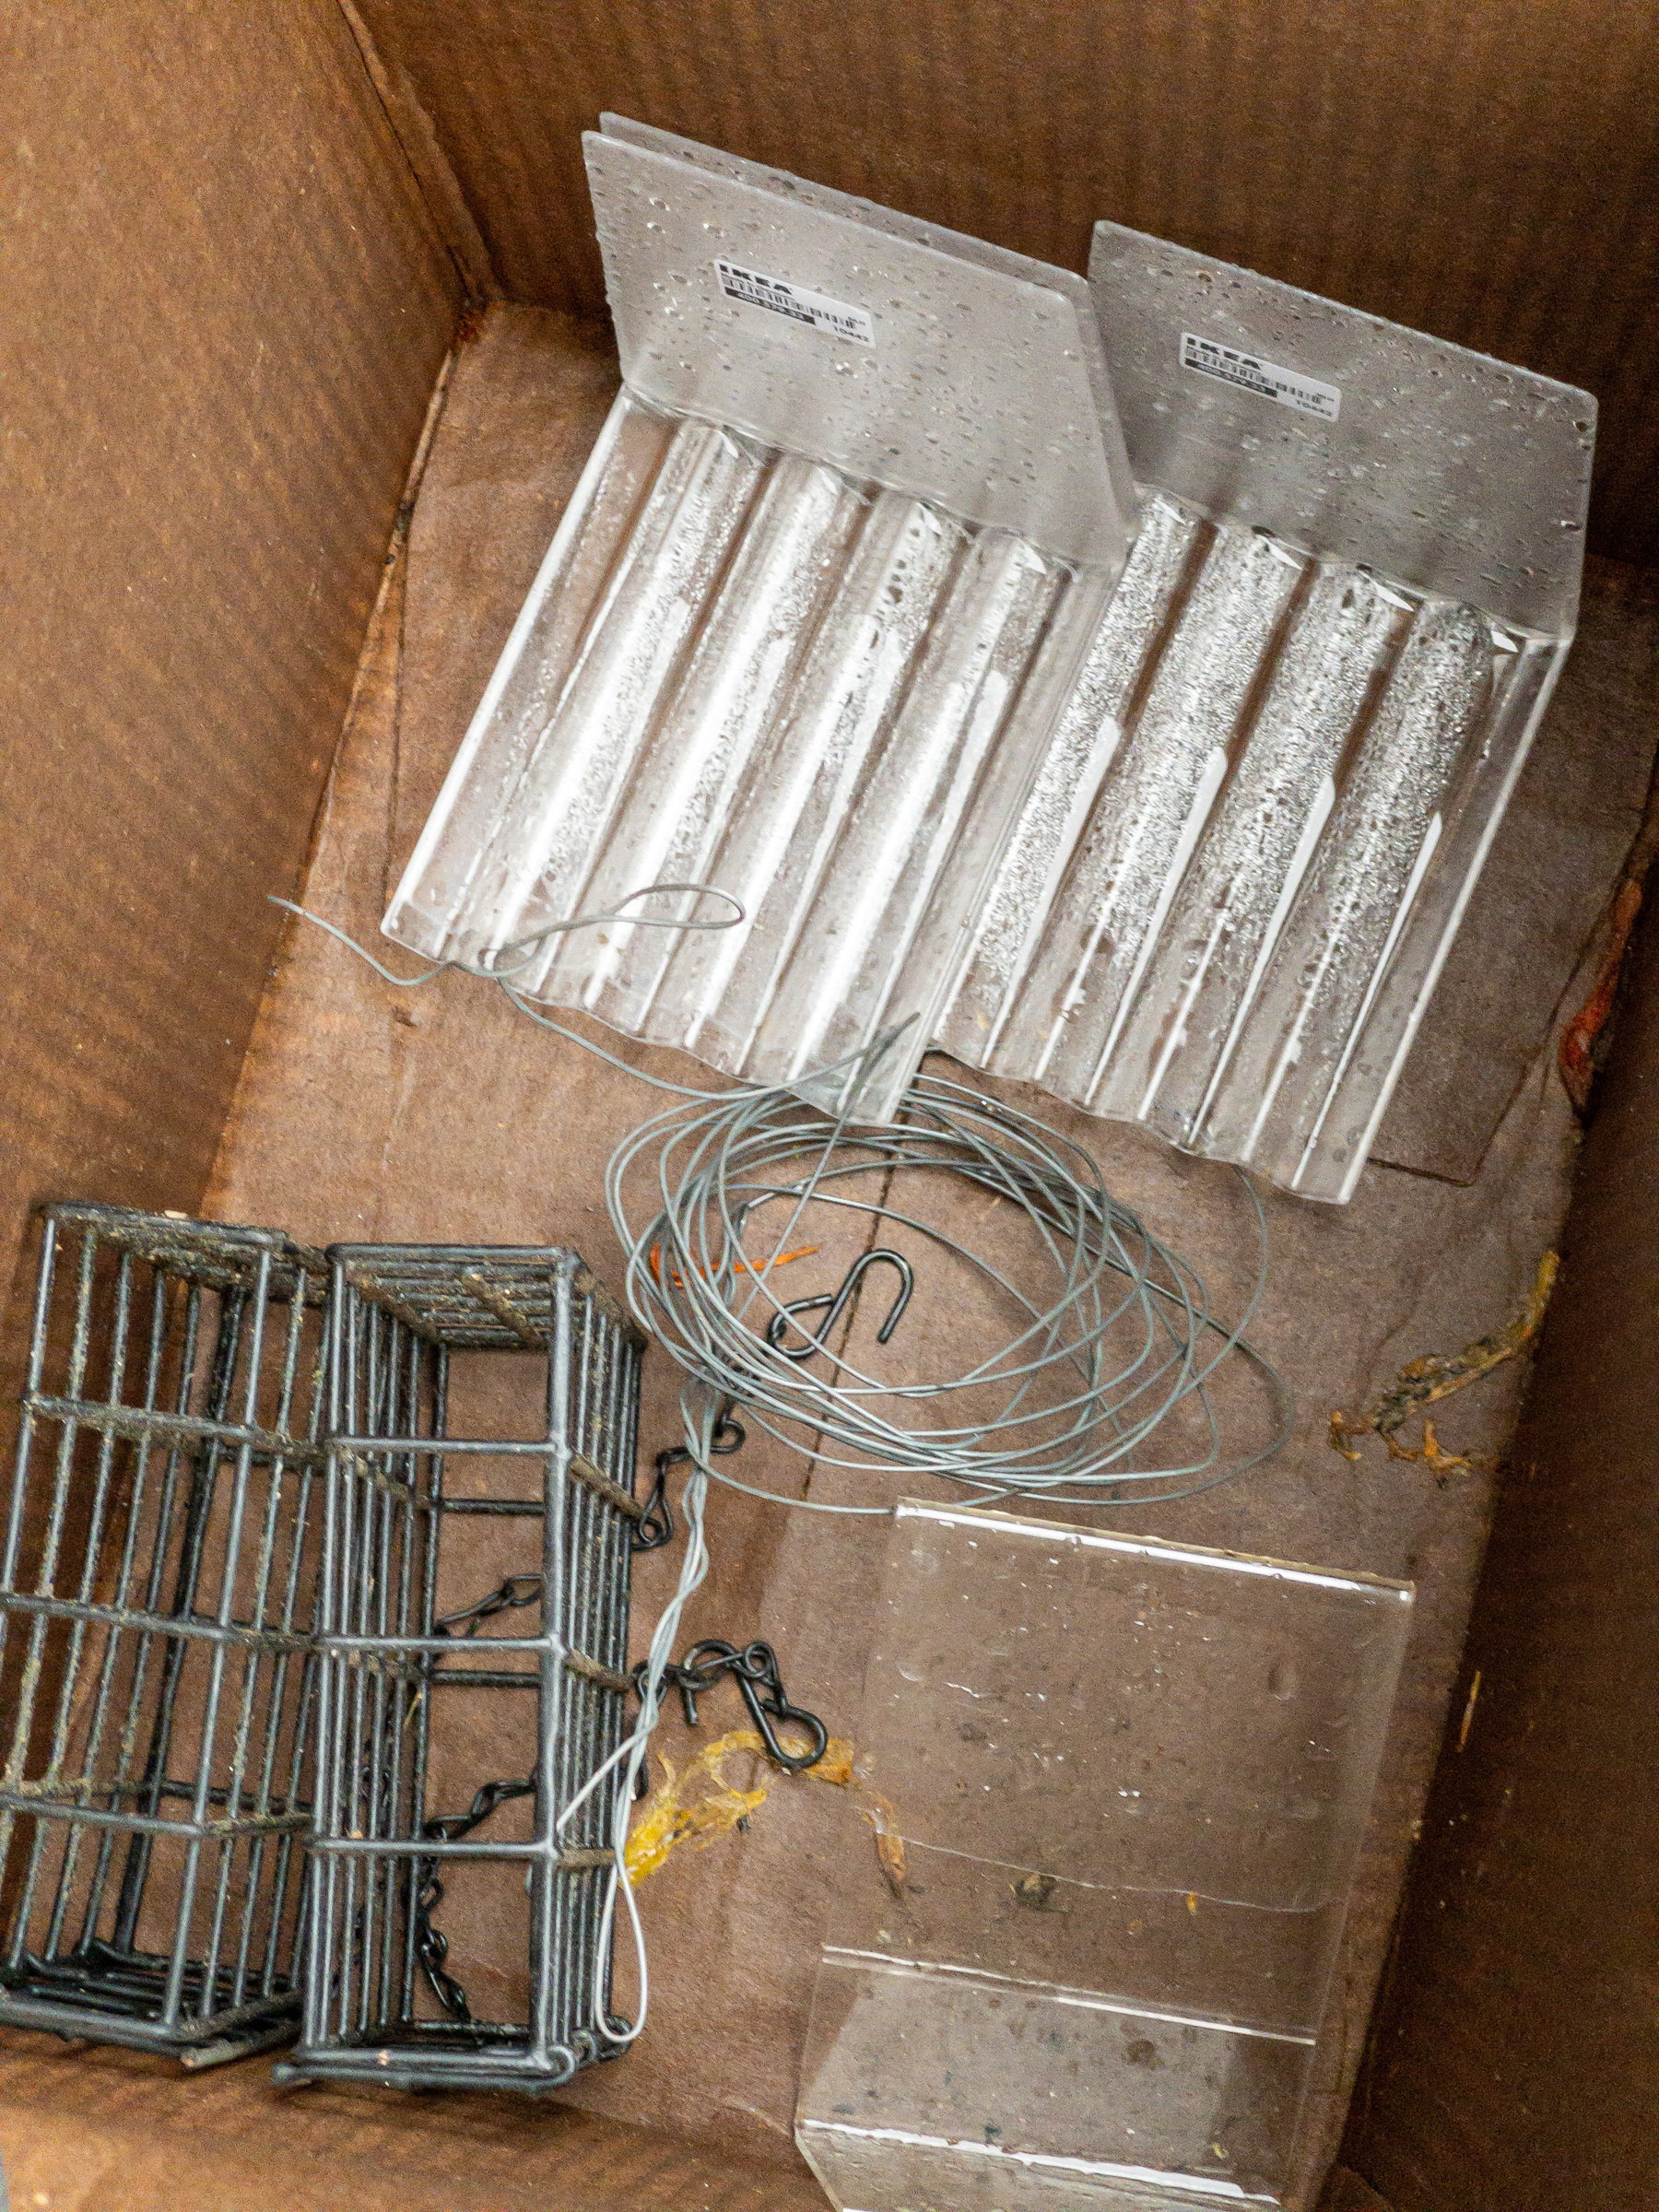 Things, plastic and metal, in a cardboard box.